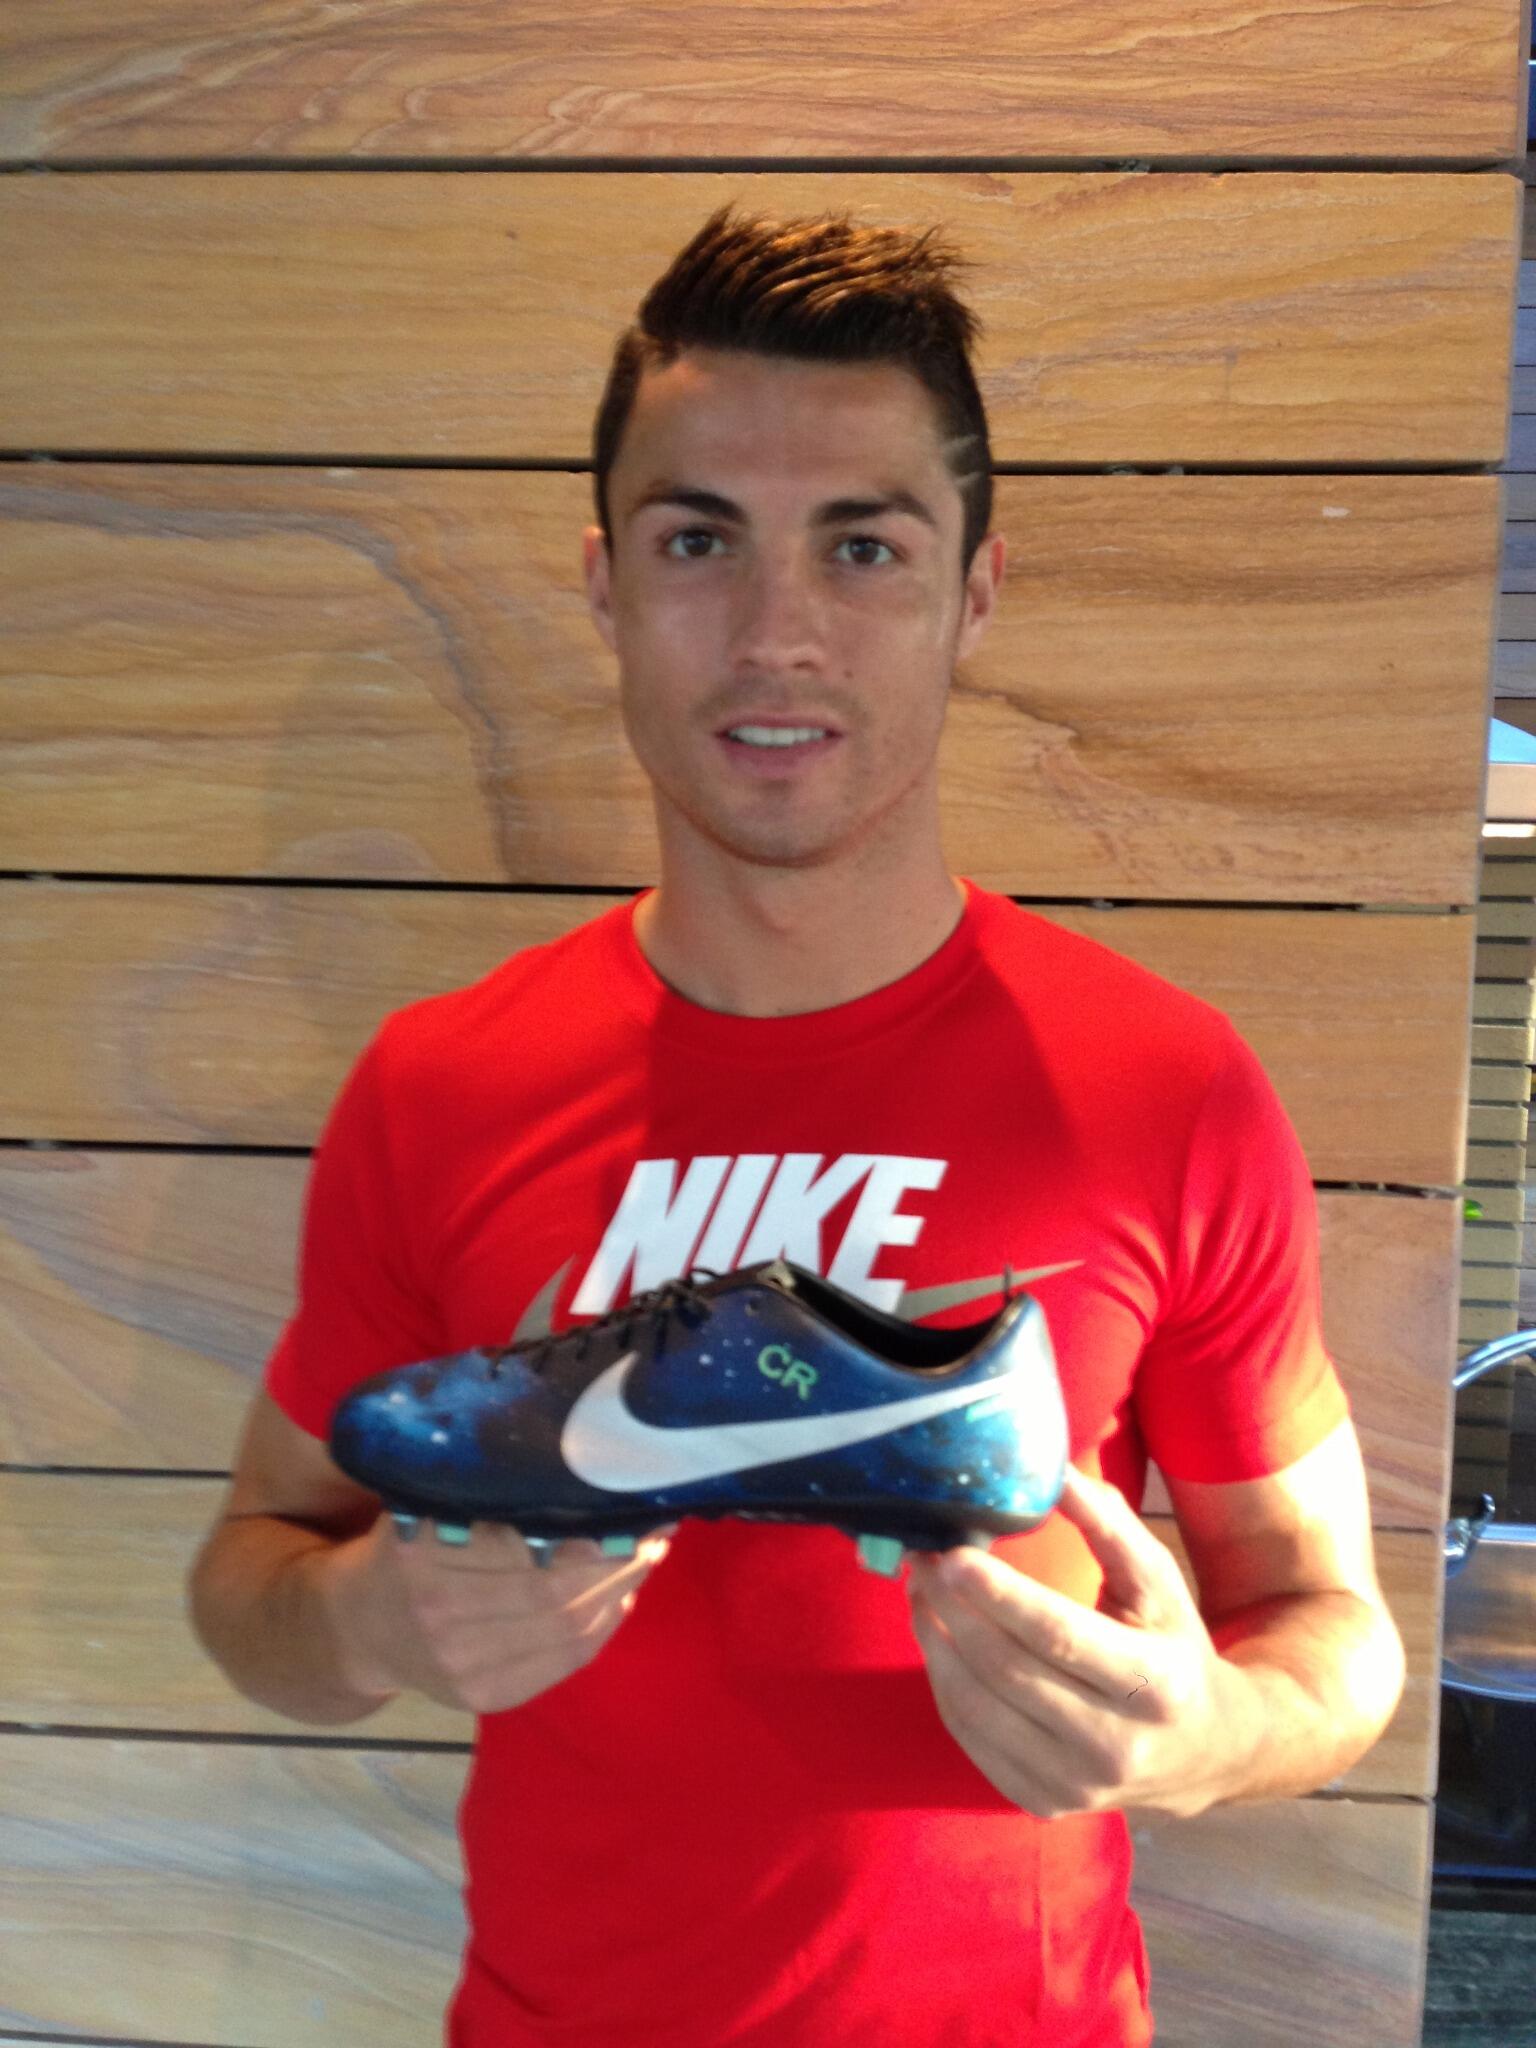 Ronaldo on Twitter: "My new #Mercurial boots from - do you think? http://t.co/VWxGRPNX37" / Twitter